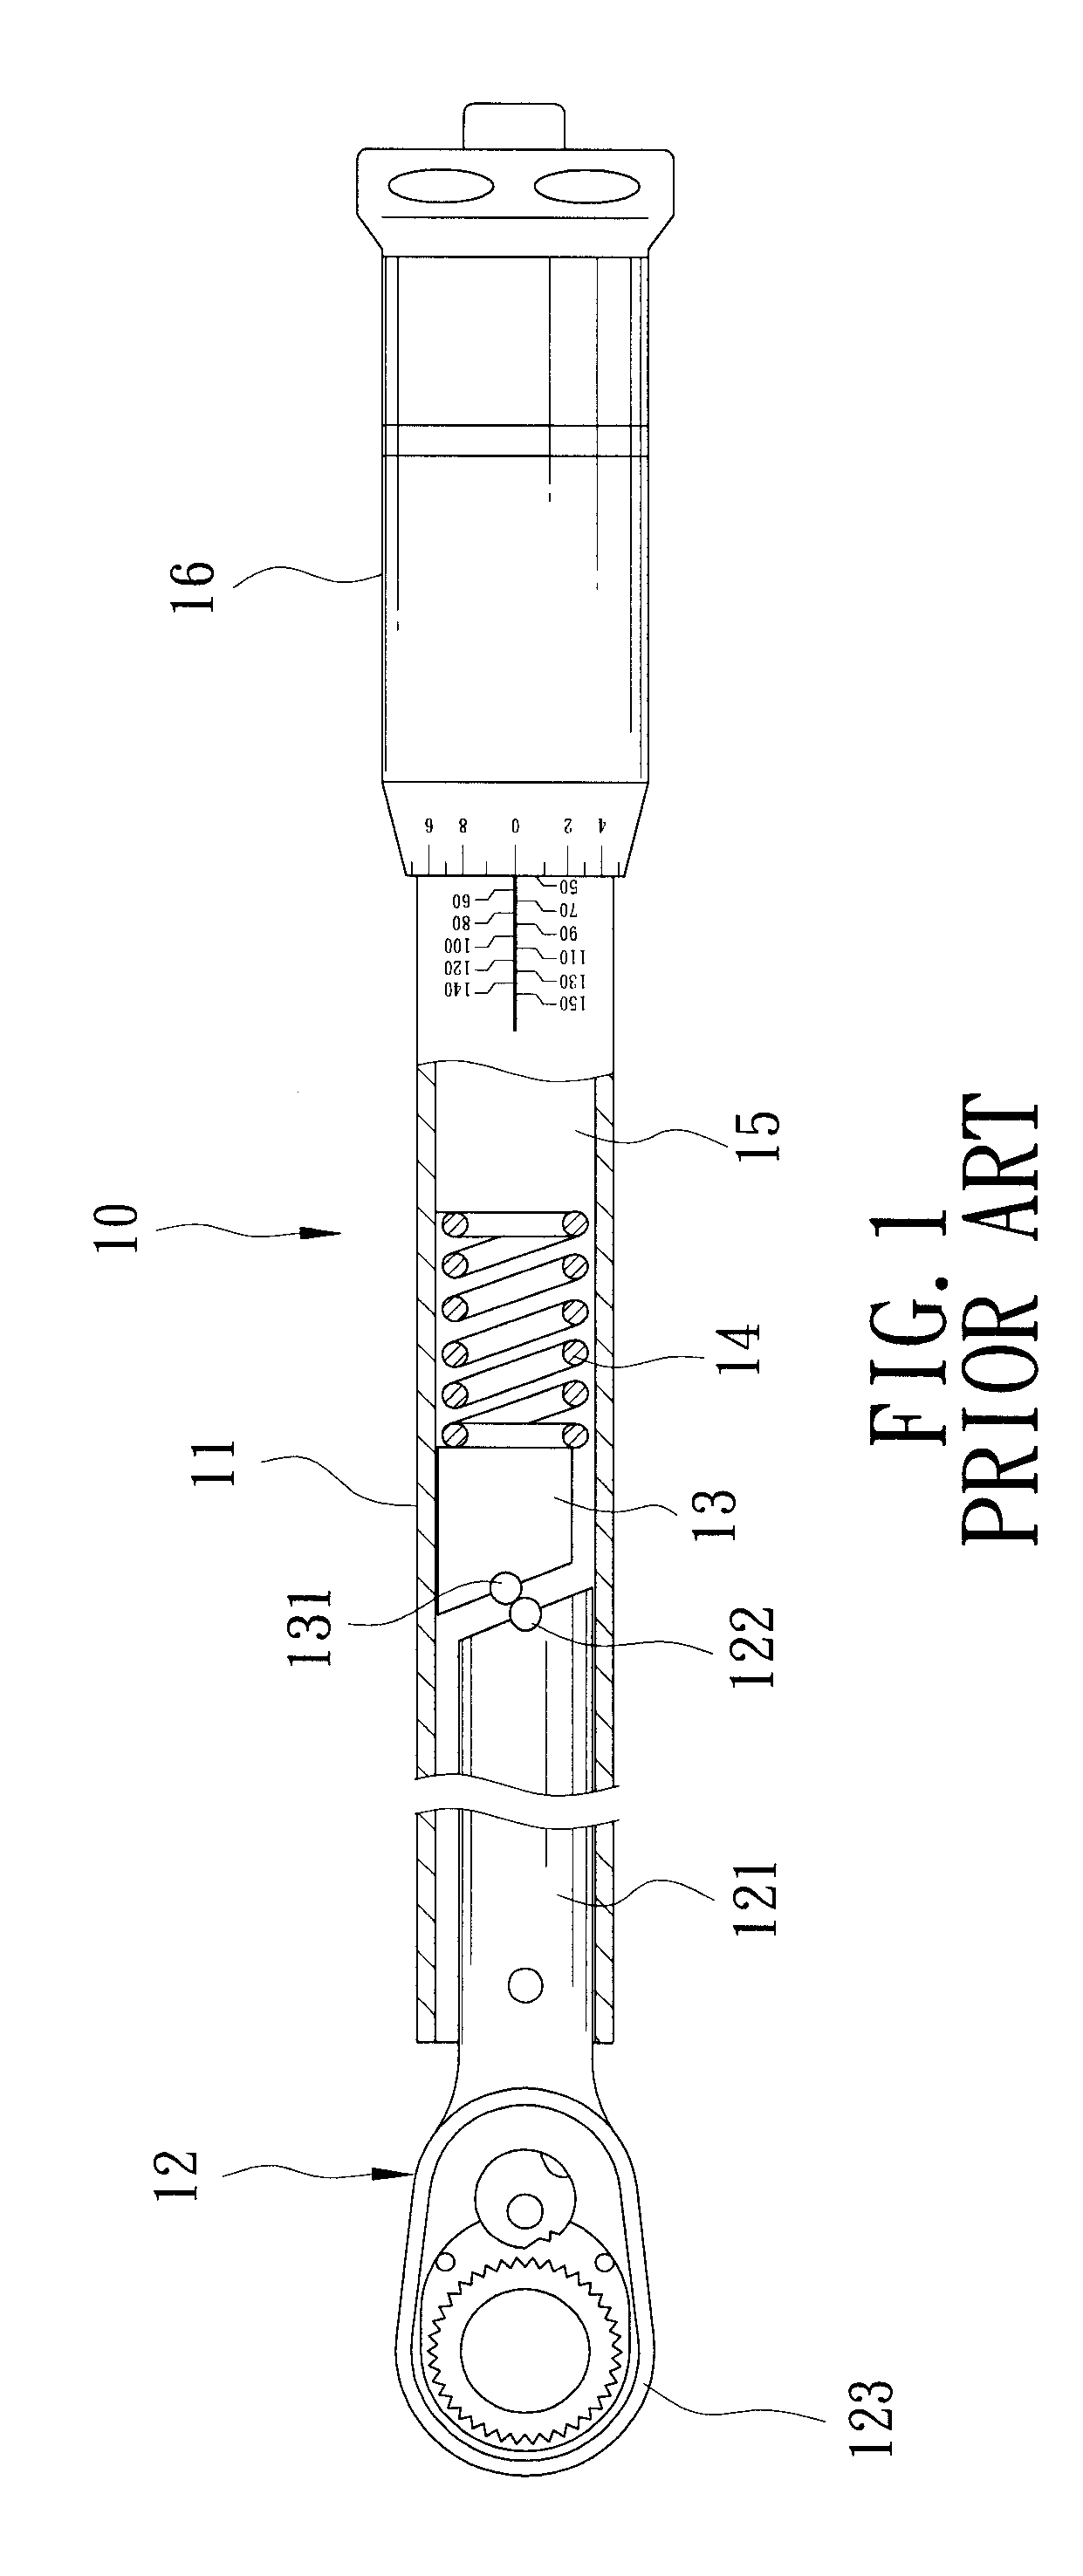 Adjustable torque limiting device for a click-type torque wrench